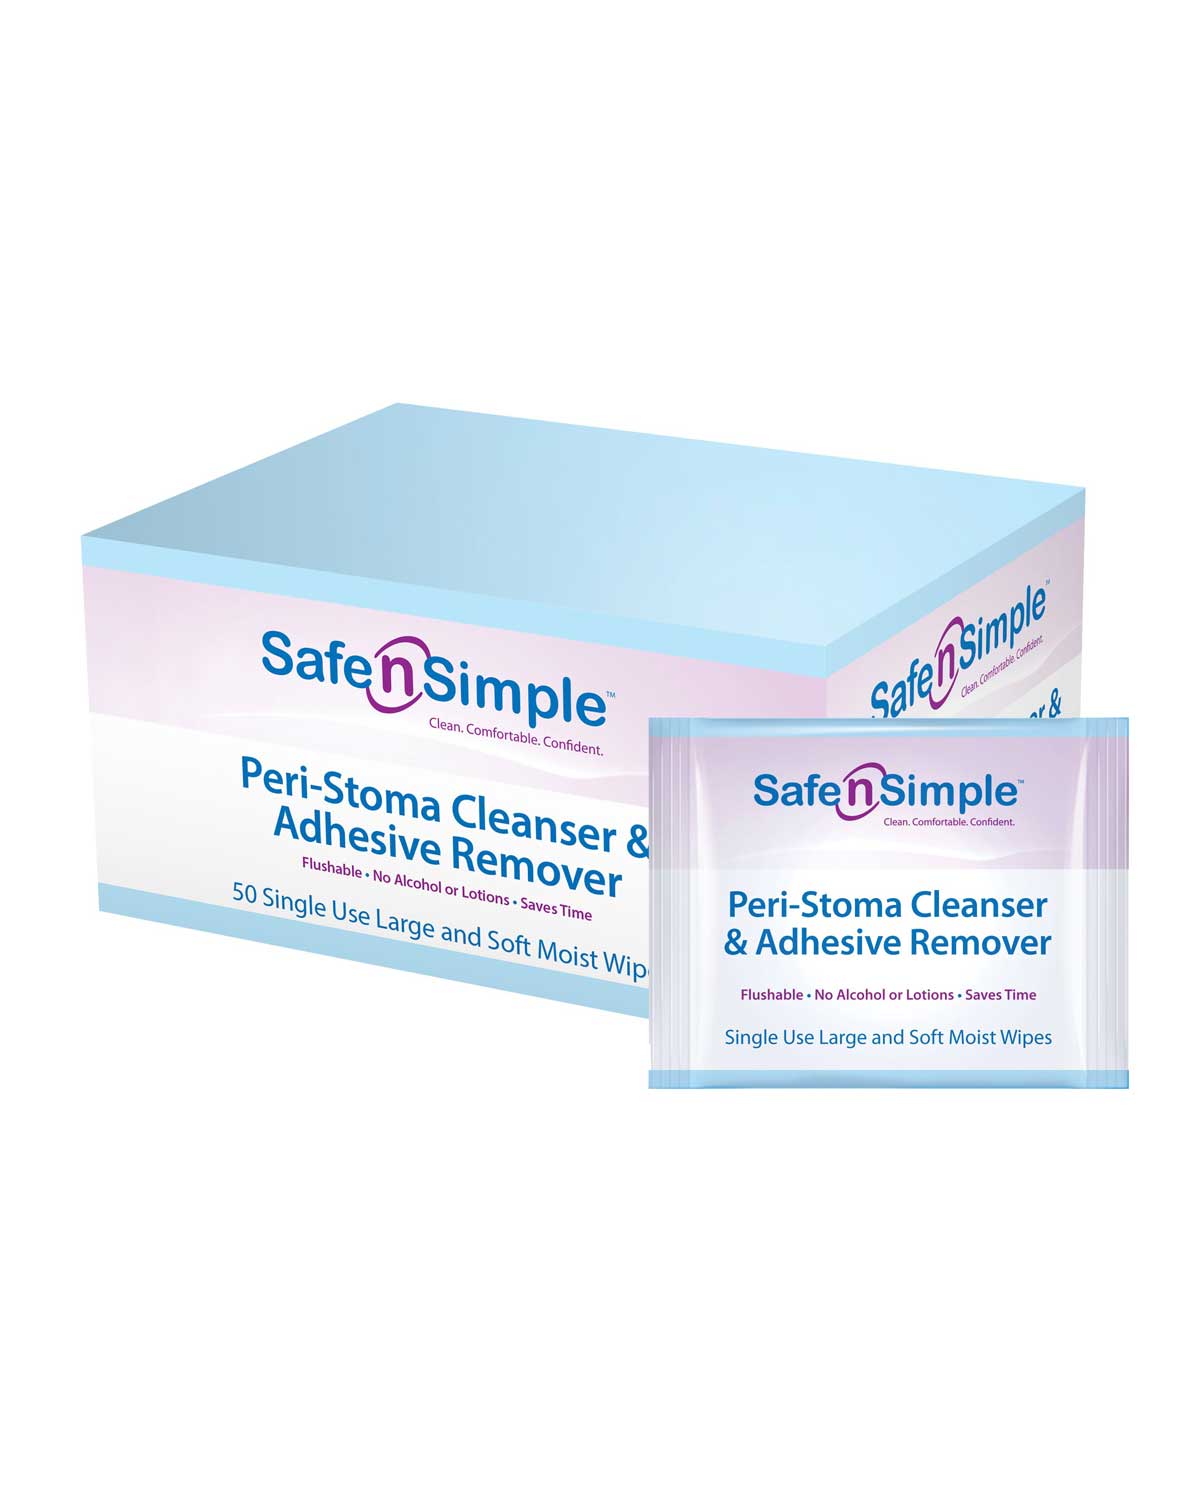 Safe n Simple Peri-Stoma Cleanser & Adhesive Remover, (50 PACKETS/BOX) - 0